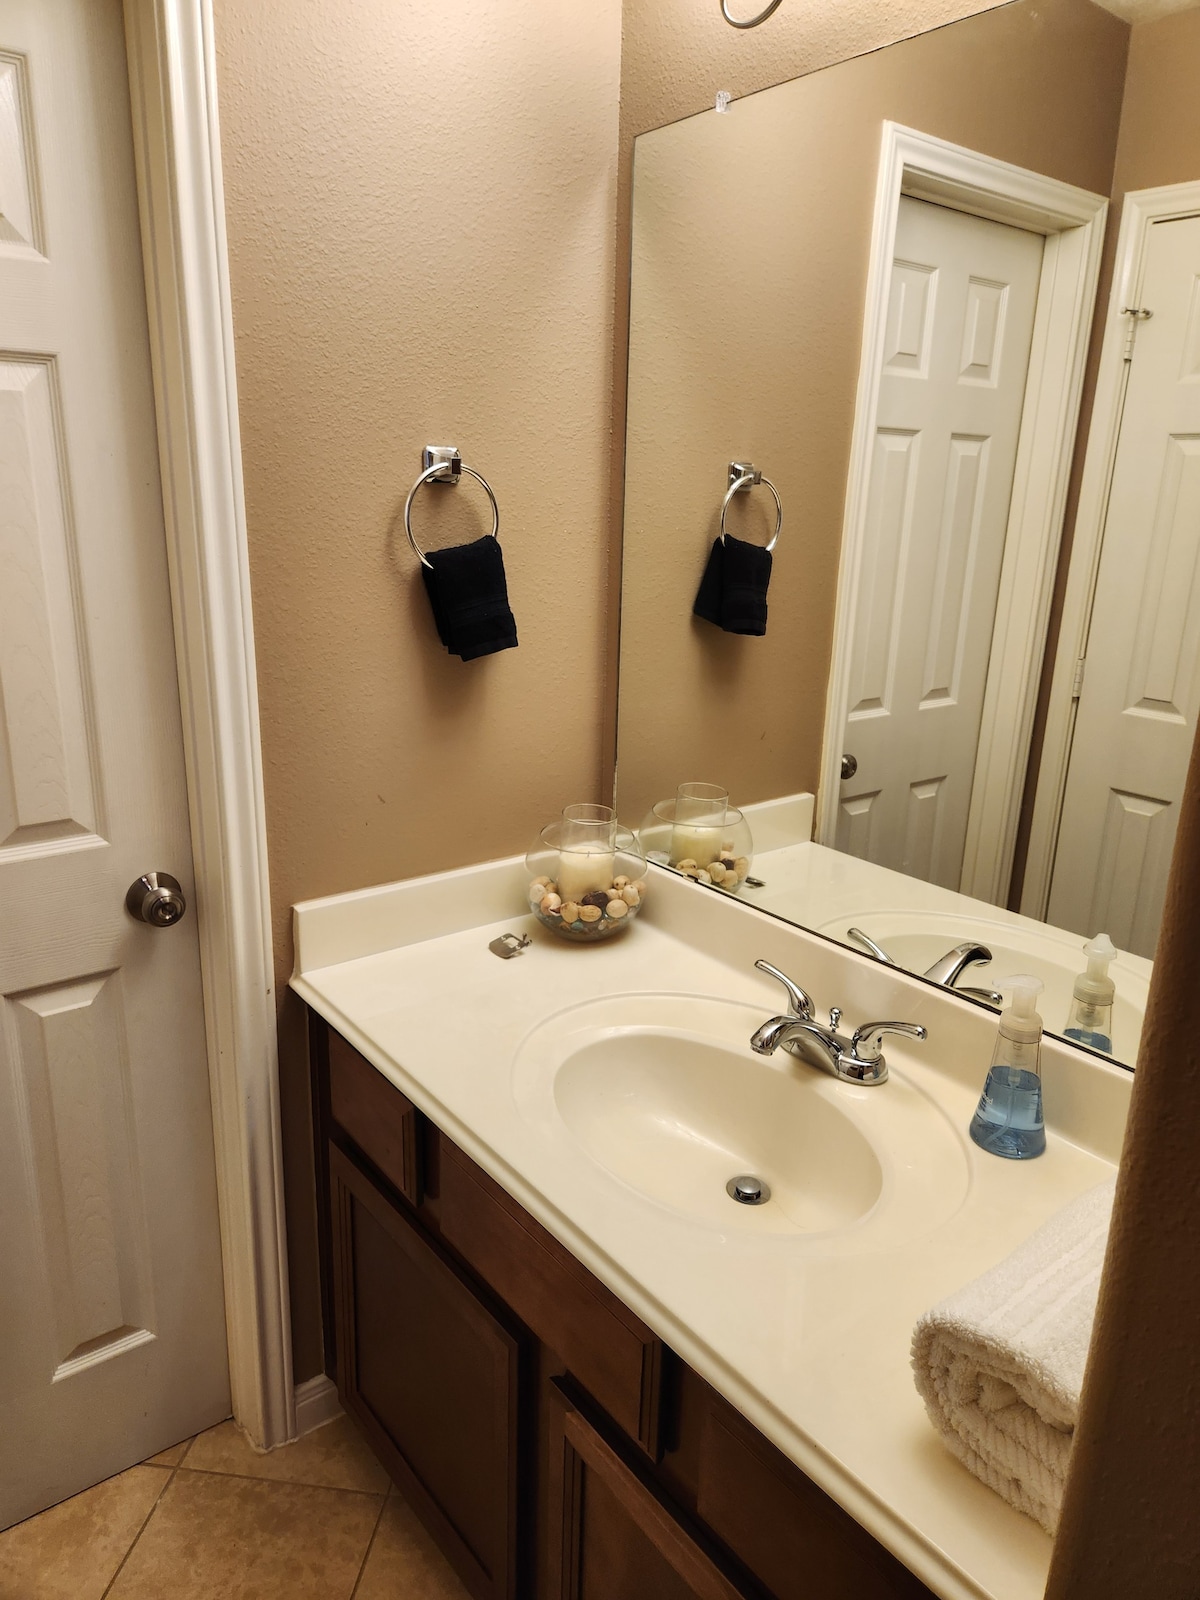 1 bedroom Pearland! Lake View & More